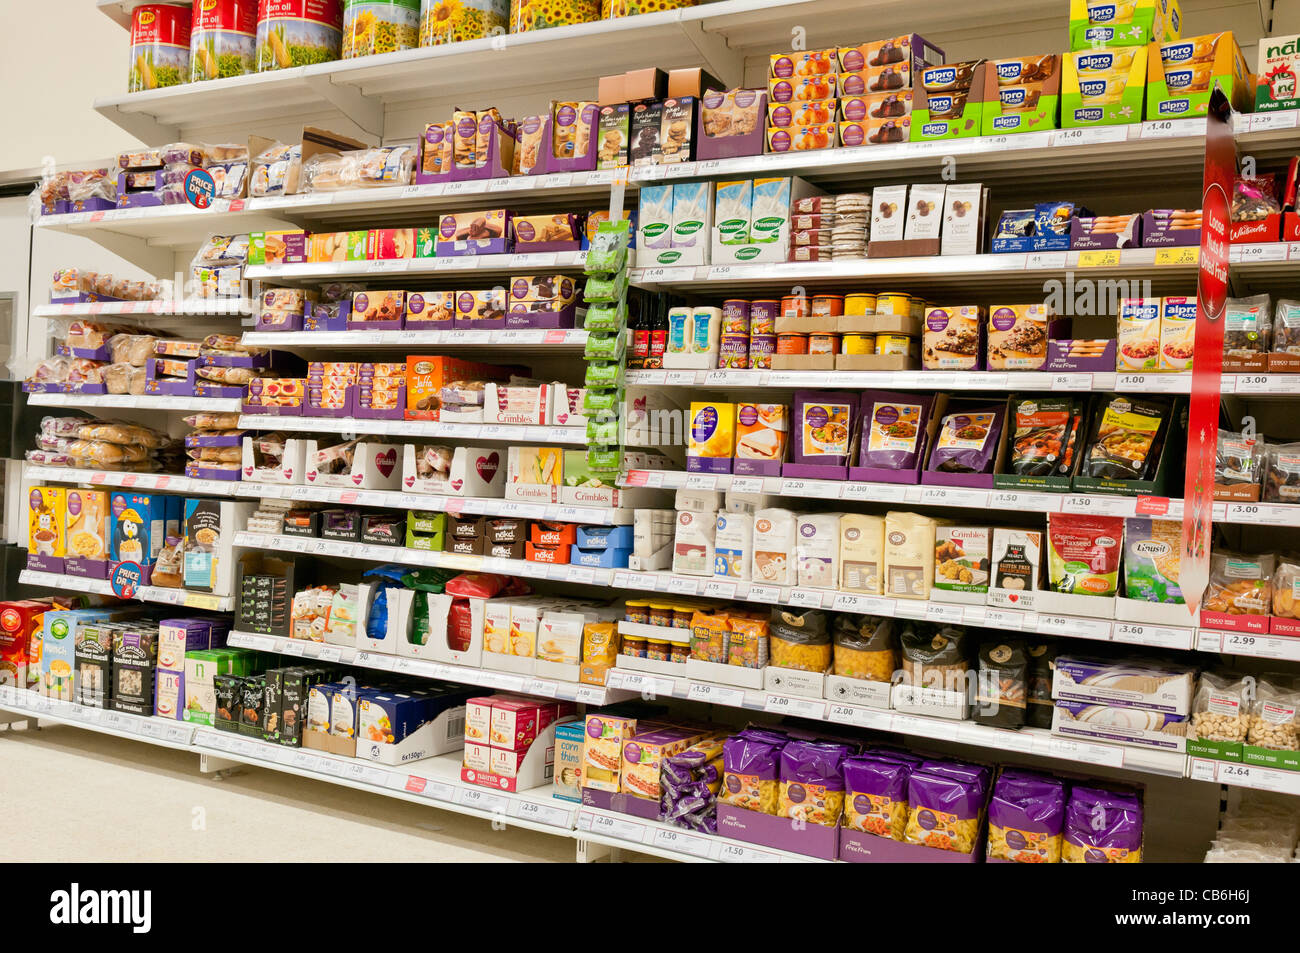 Shelves of gluten, dairy and nut free food on shelves in a Tesco store Stock Photo